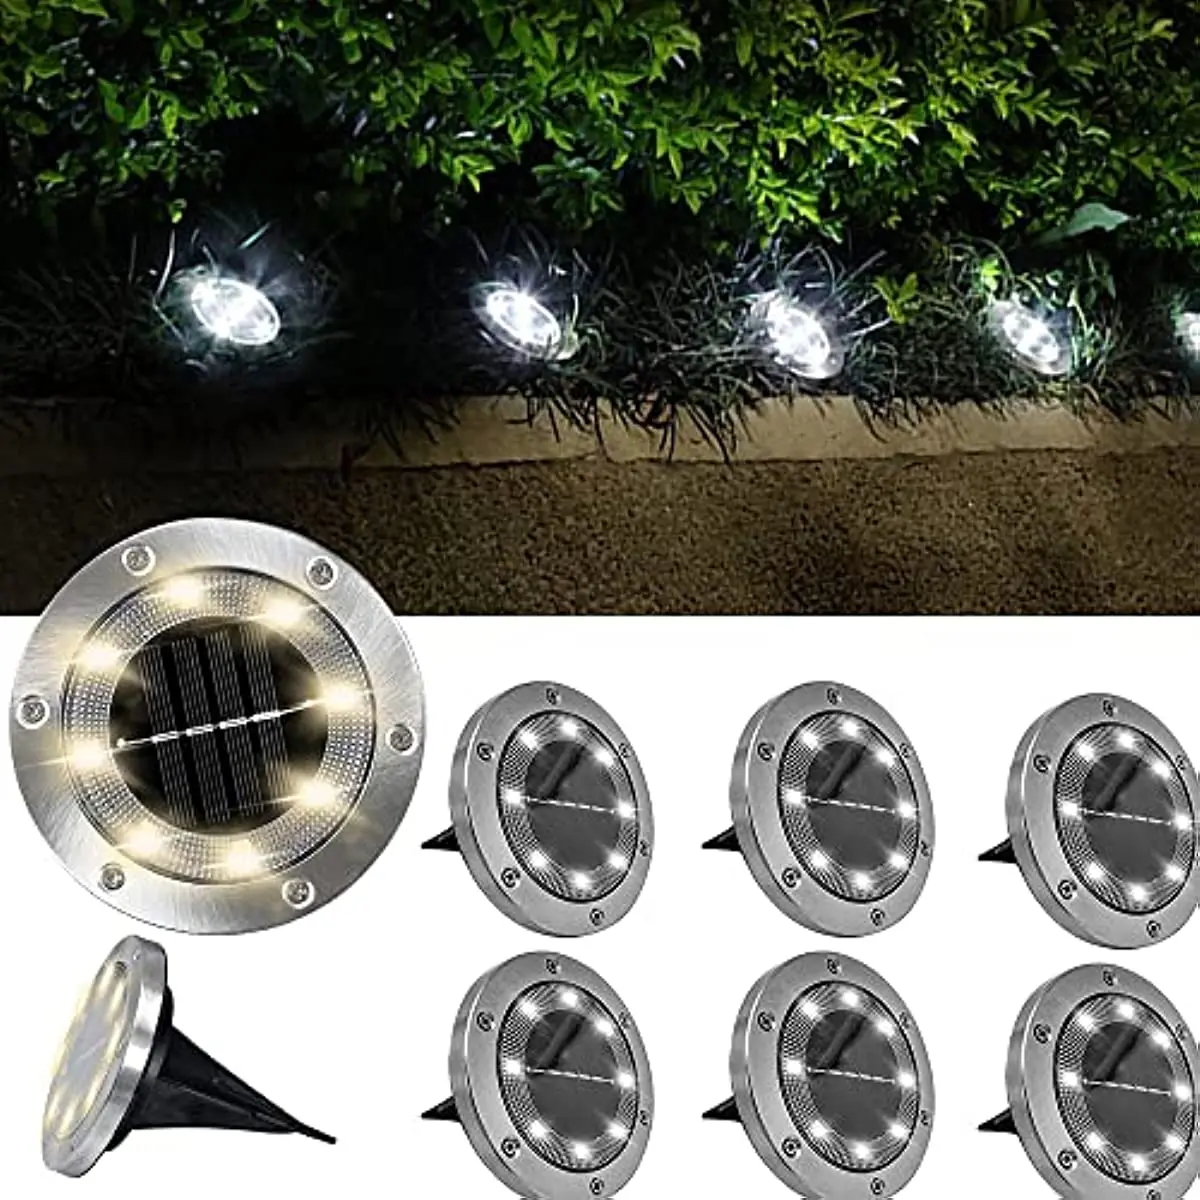 8 LED Upgraded Solar lawn Lights Ground Outdoor Waterproof Solar Garden Decoration Lamps Disk Pathway Yard Landscape Lighting